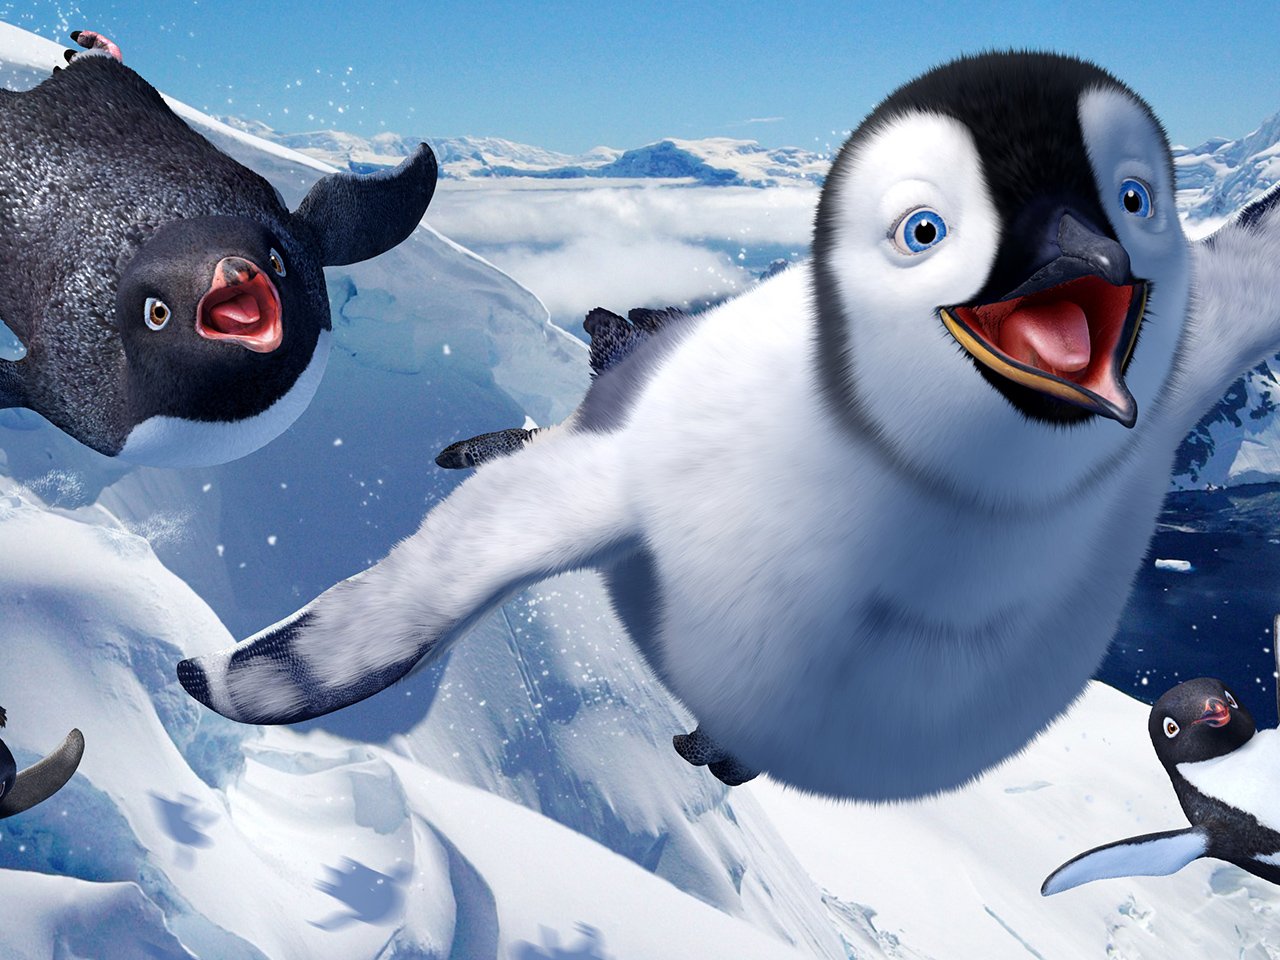 A still from the kids' animated movie Happy Feet